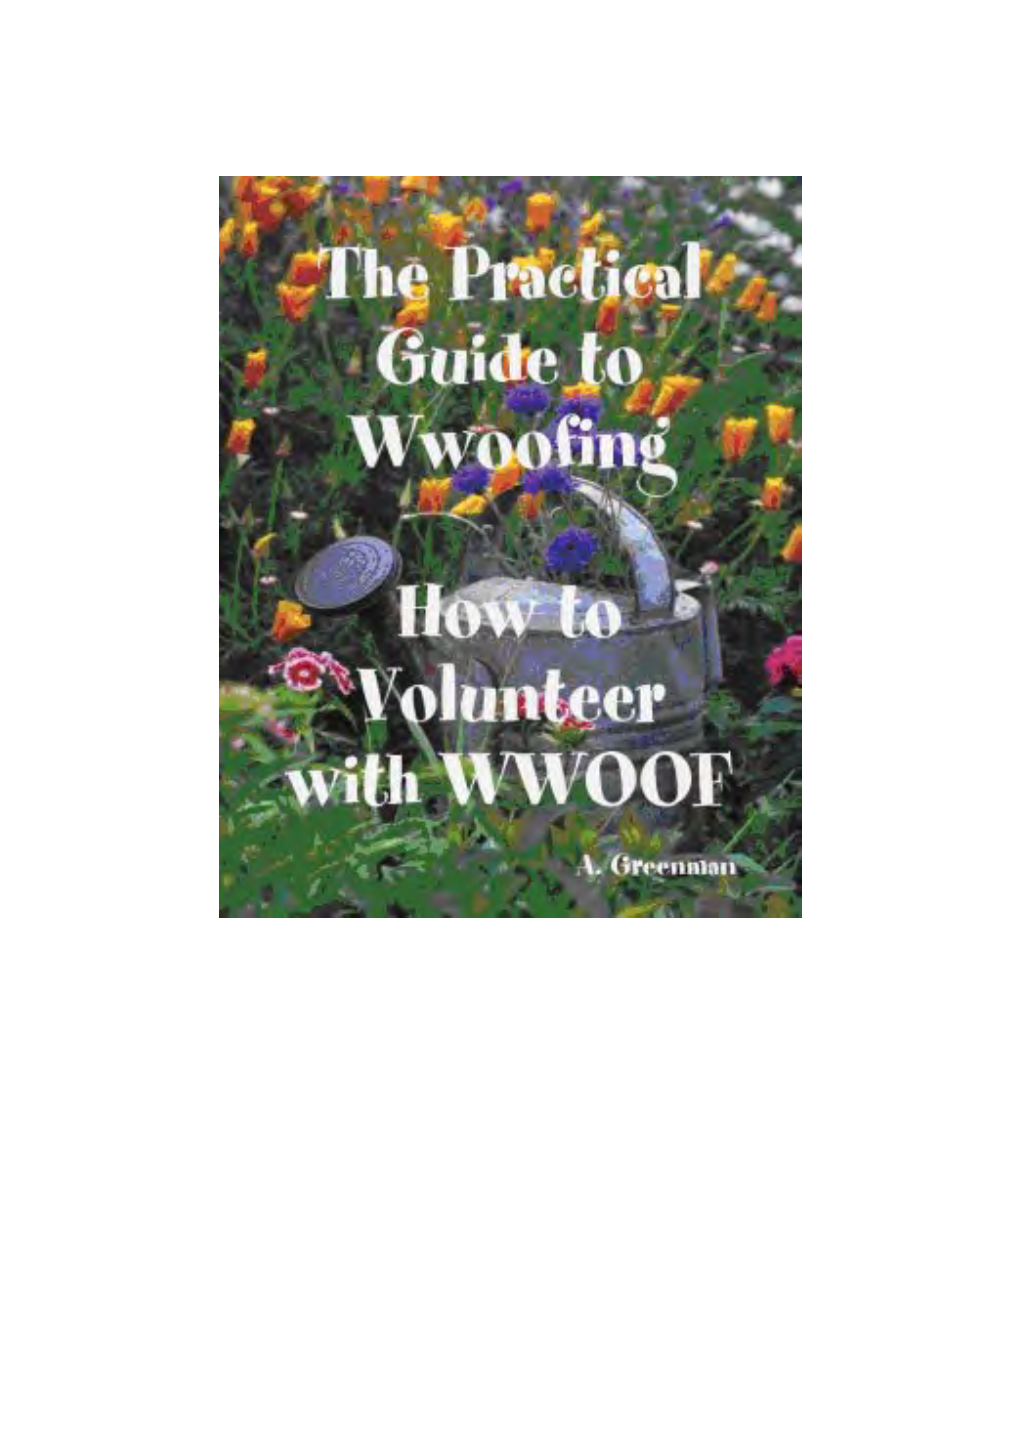 The Original Practical Guide to Wwoofing by A